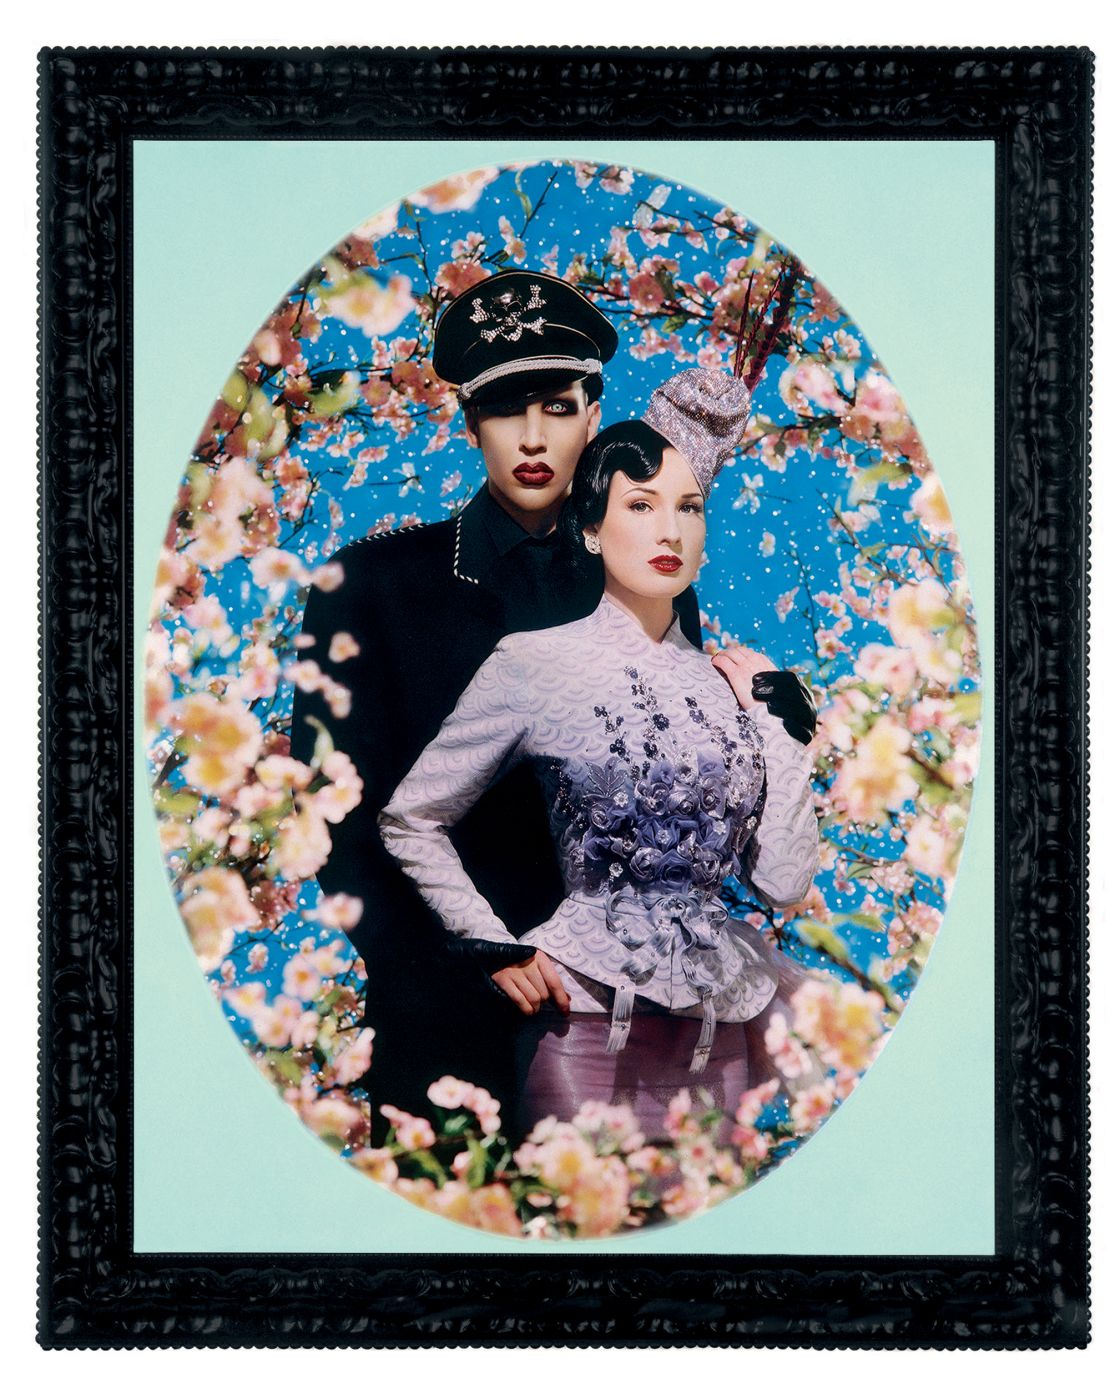 "Le Grand Amour," (Marilyn Manson and Dita von Teese), from the Pinault Collection.